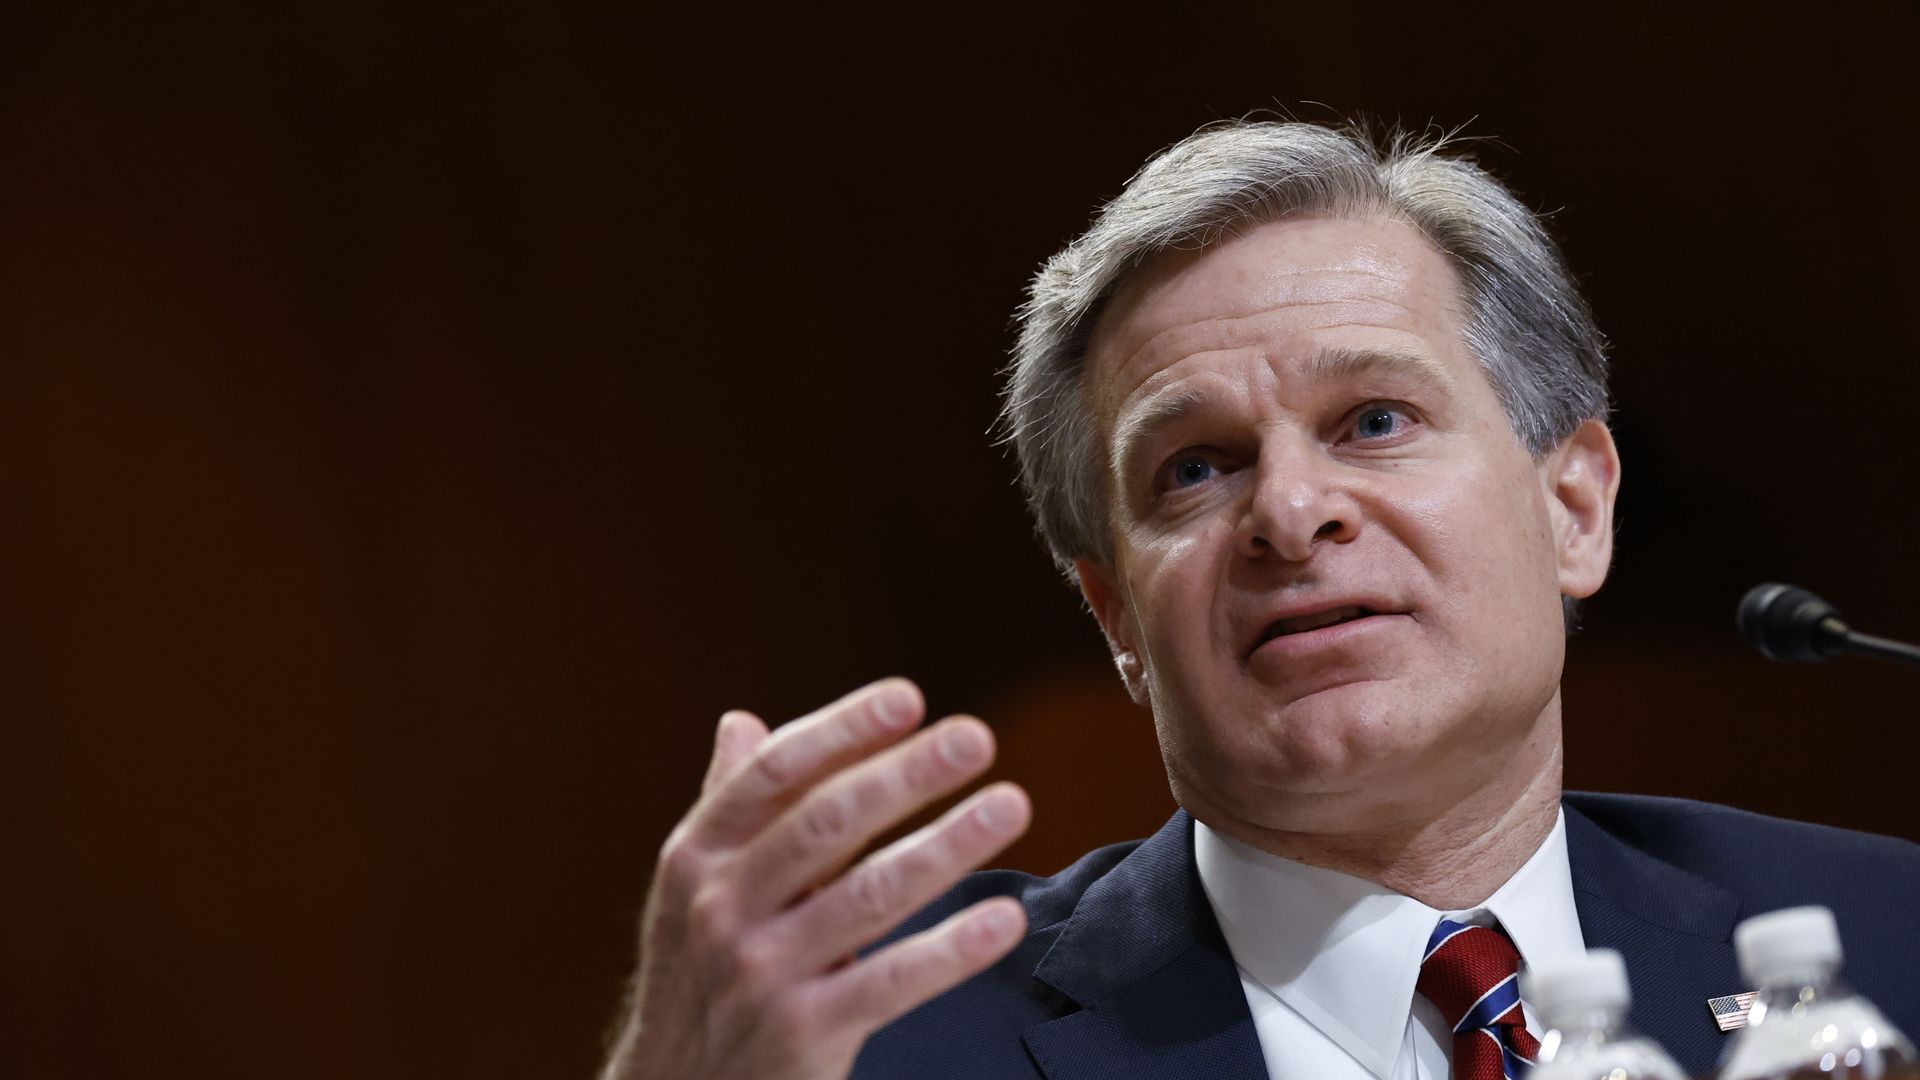 FBI Director Christopher Wray speaks during a Senate Appropriations Subcommittee hearing on the fiscal year 2023 budget for the FBI at the U.S. Capitol on May 25.